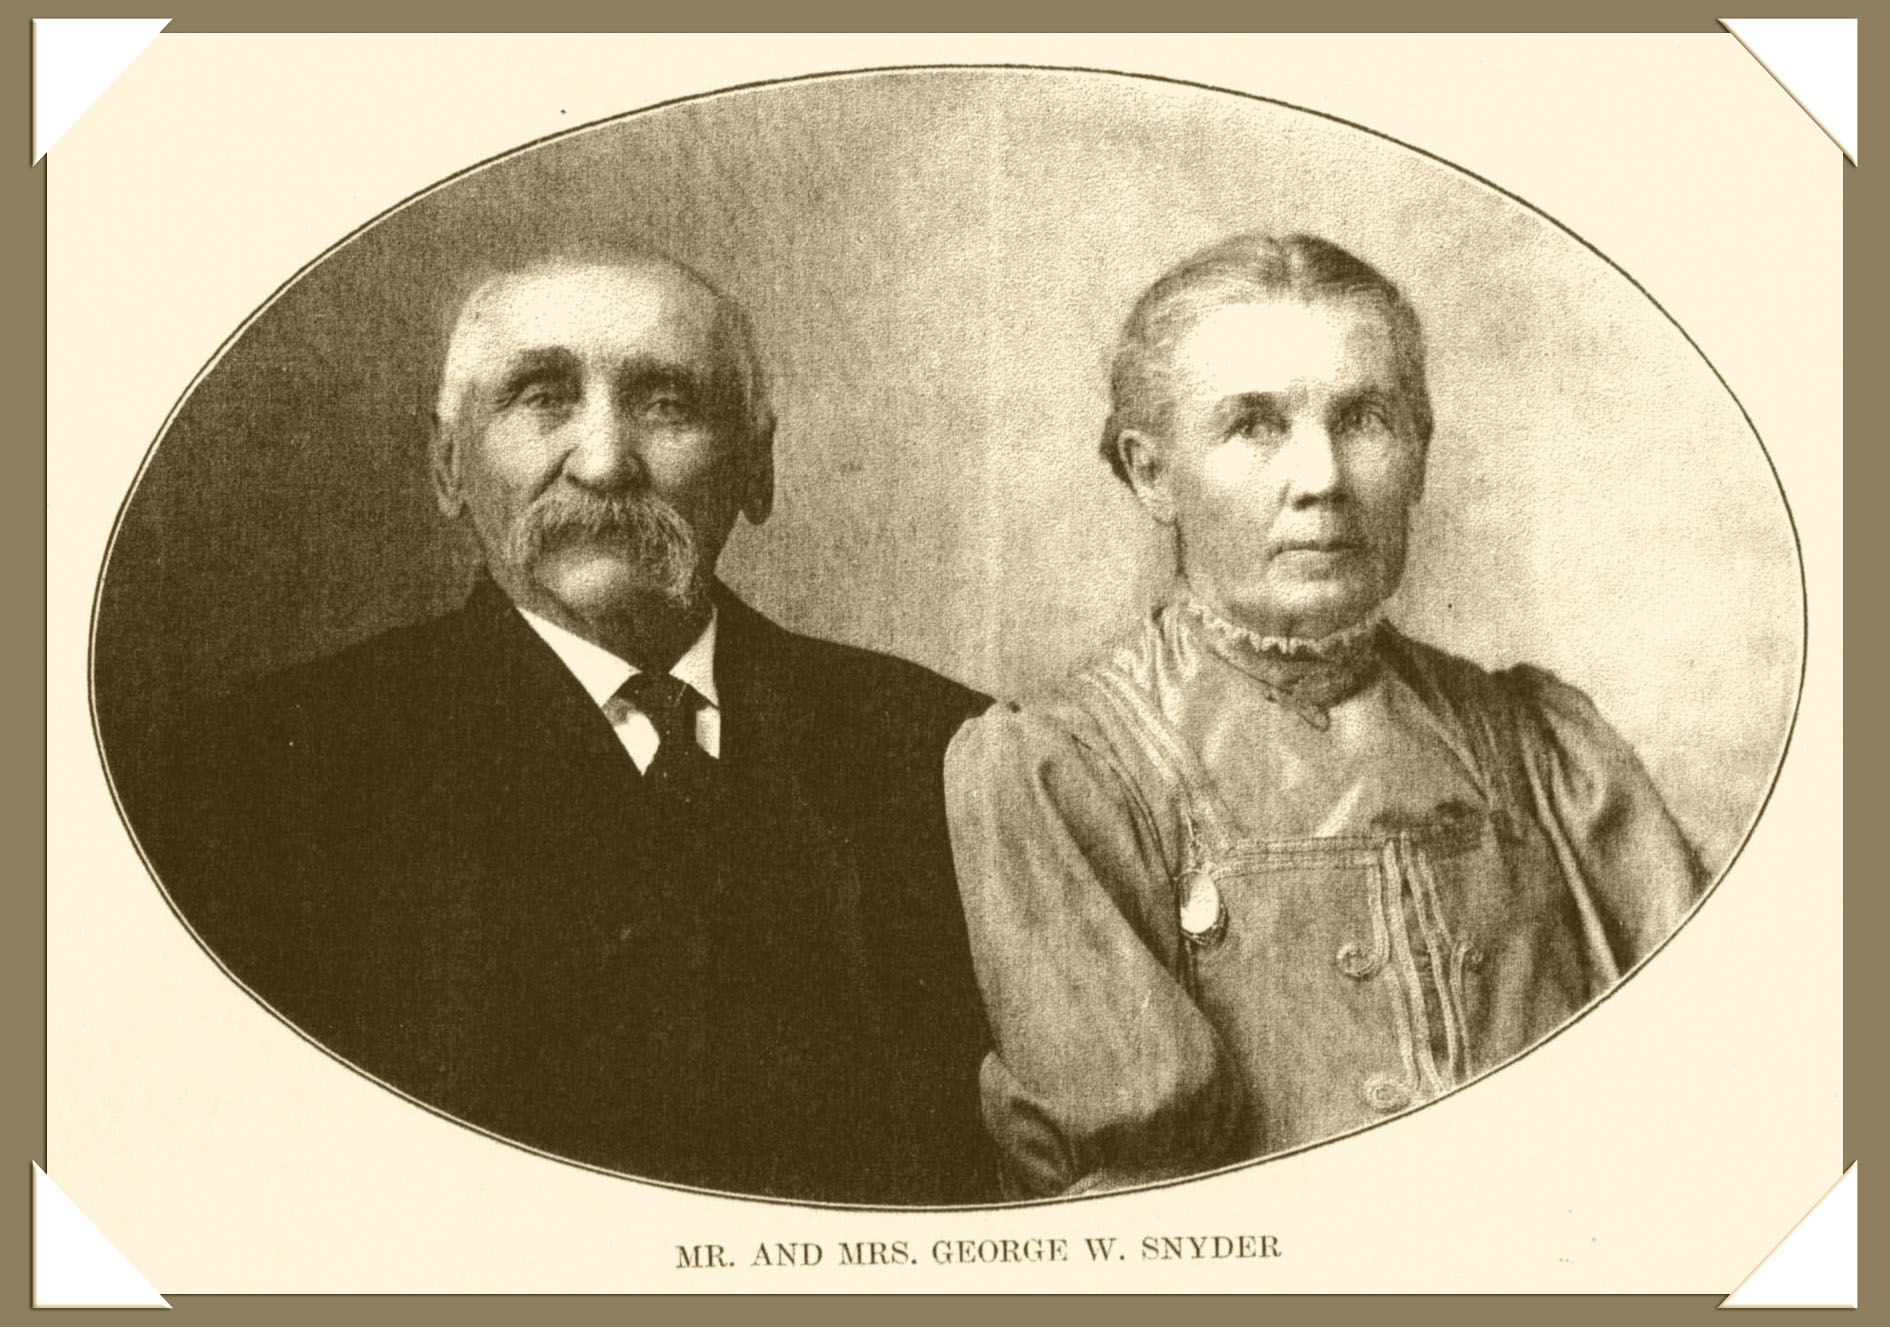 George and Sarah (Isbell) Snyder